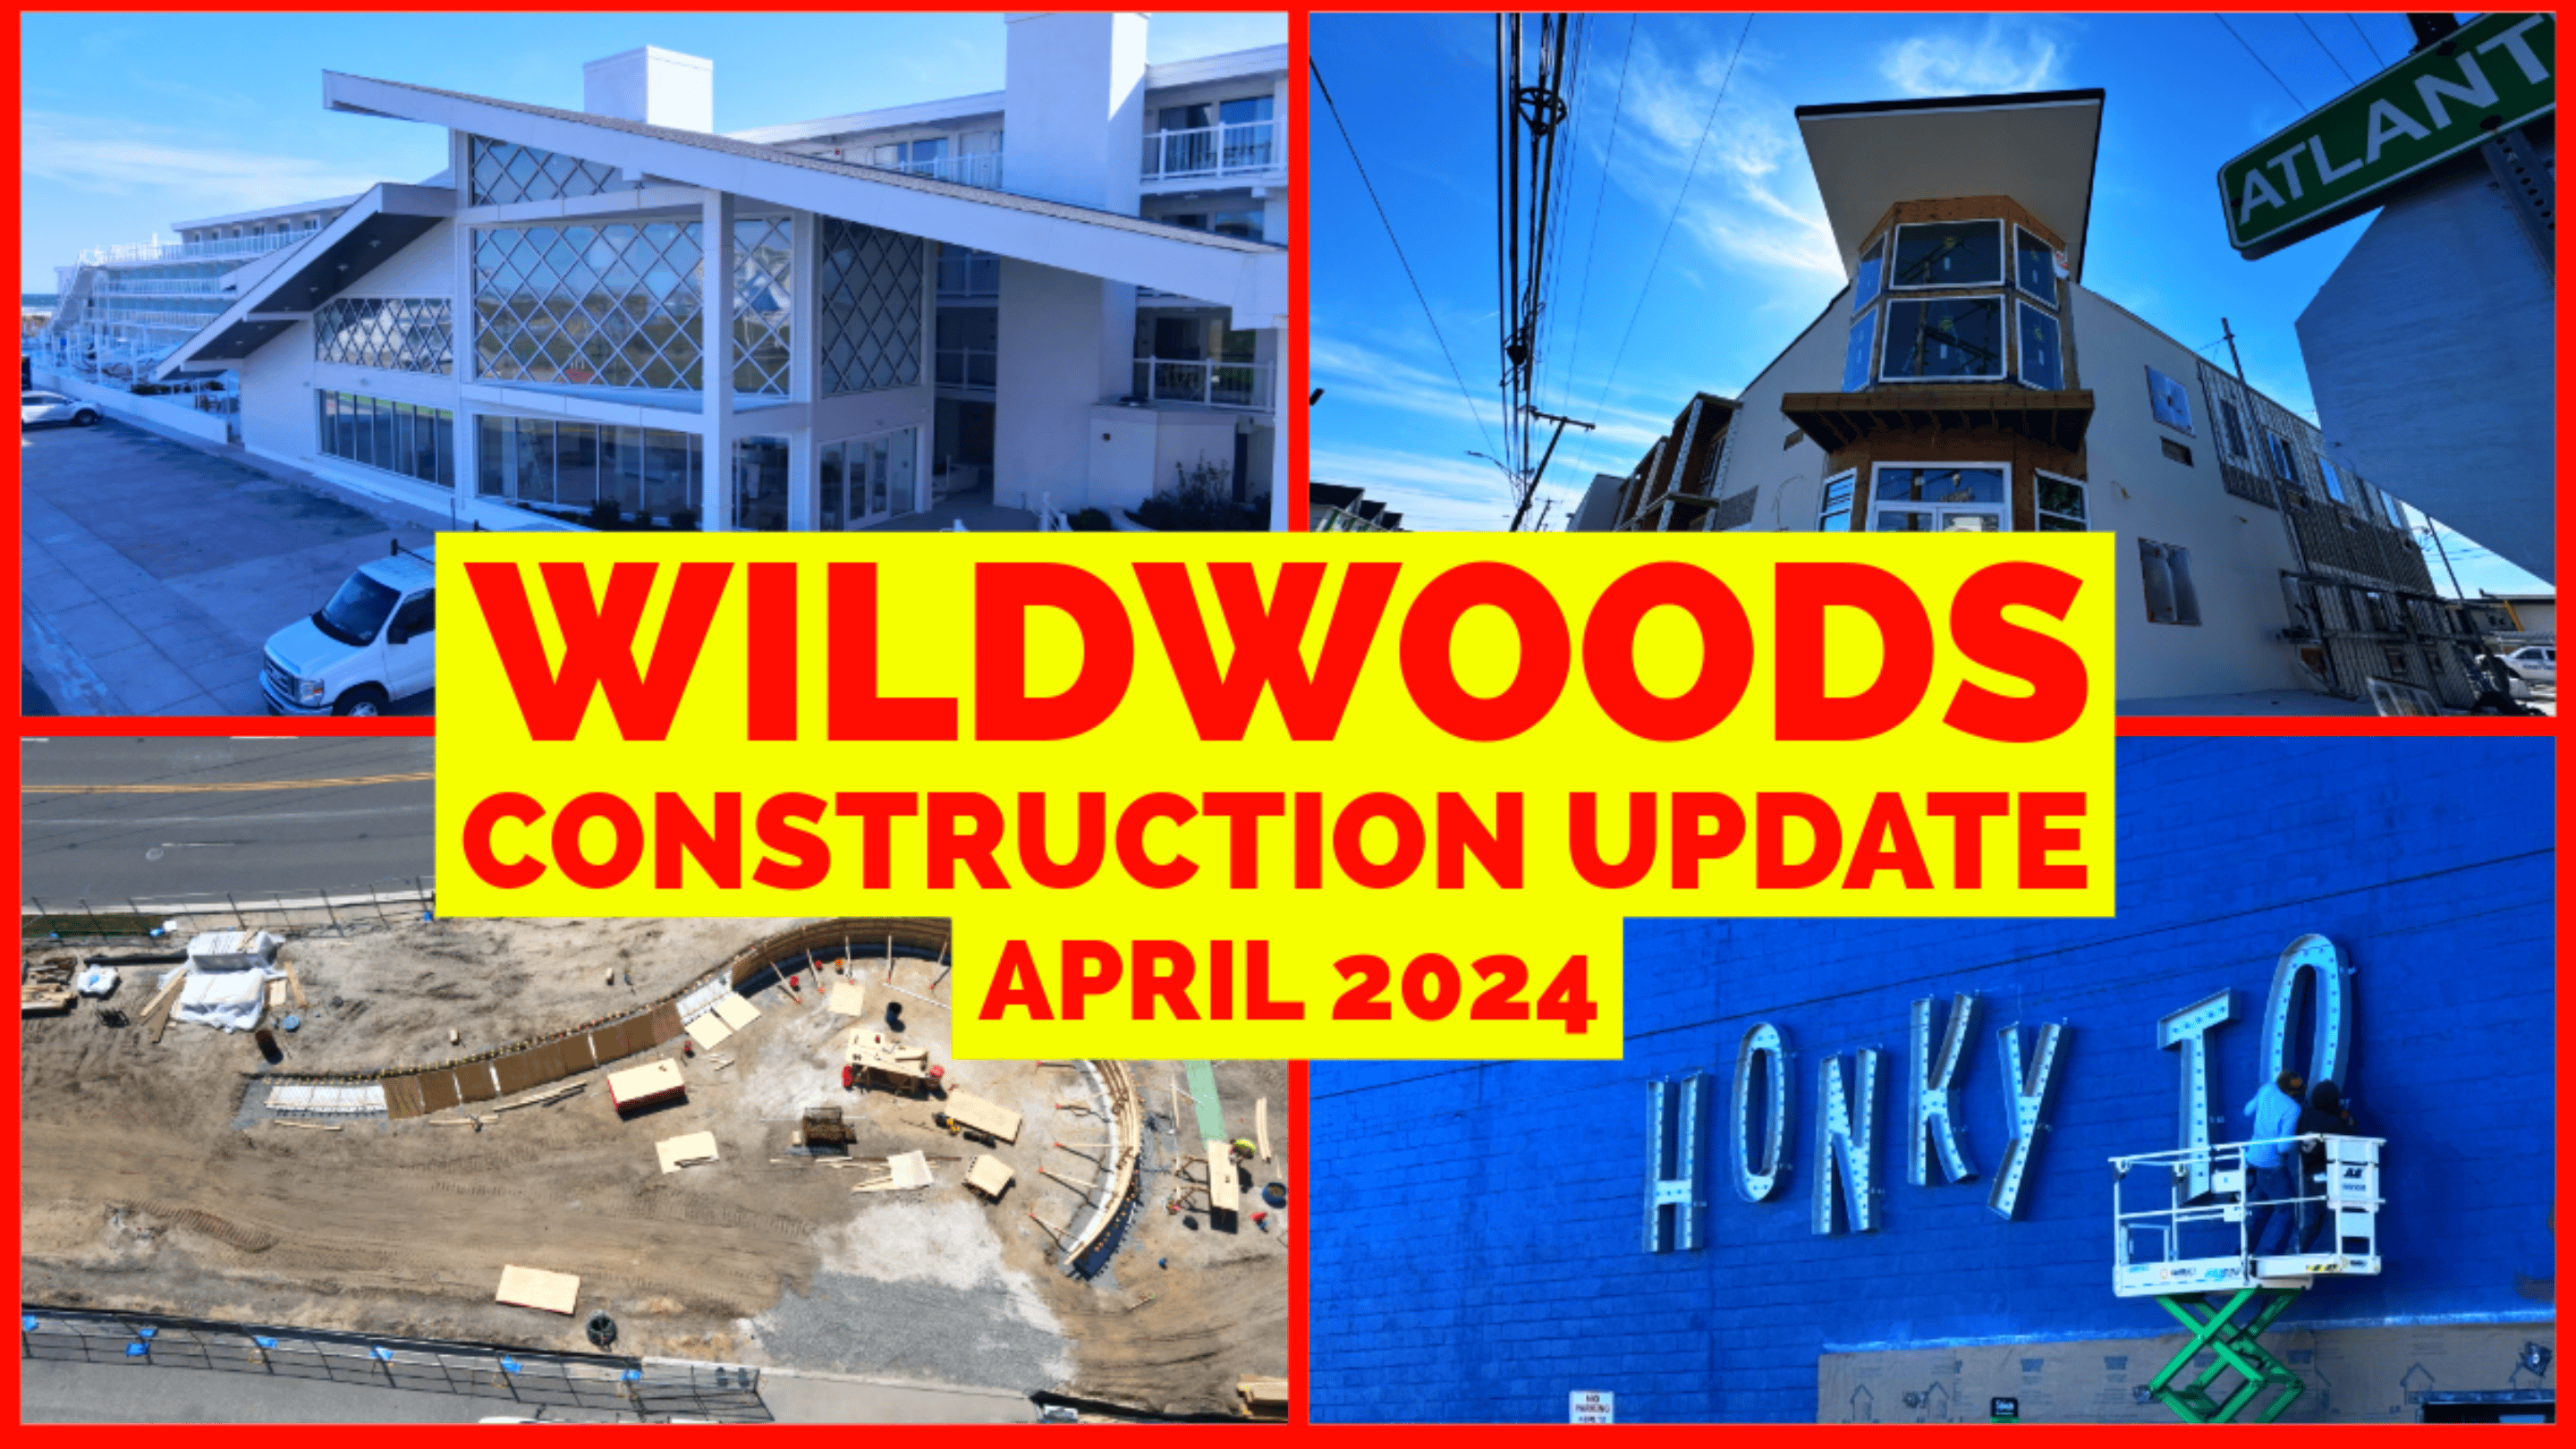 Wildwoods Construction Update - Late April 2024